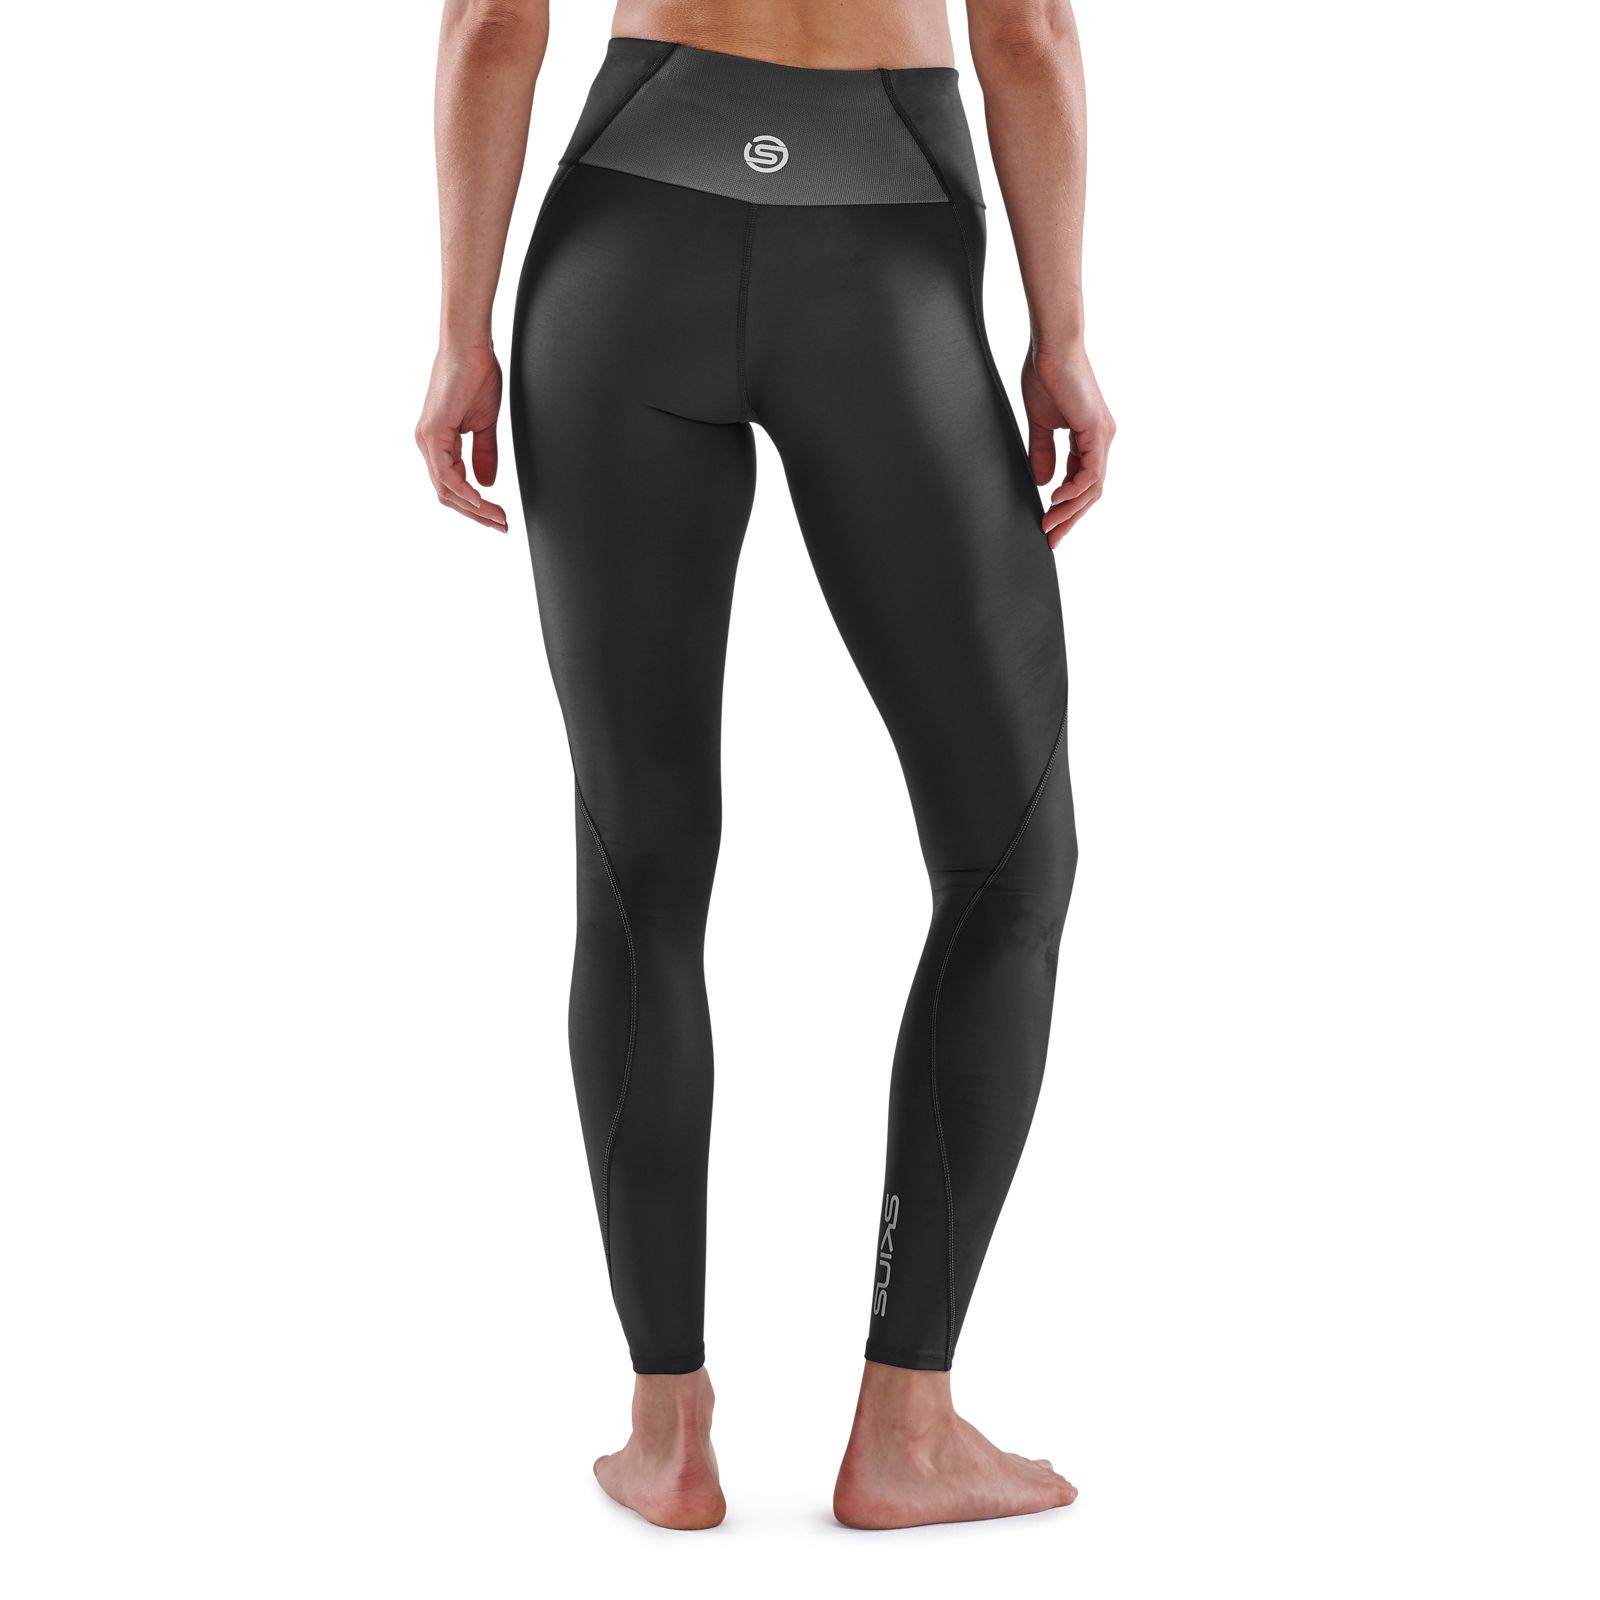 RUNNING/TRAIL CLOTHING & EQUIPMENT Skins DNAMIC ULTIMATE - 7/8 Tights -  Women's - black - Private Sport Shop